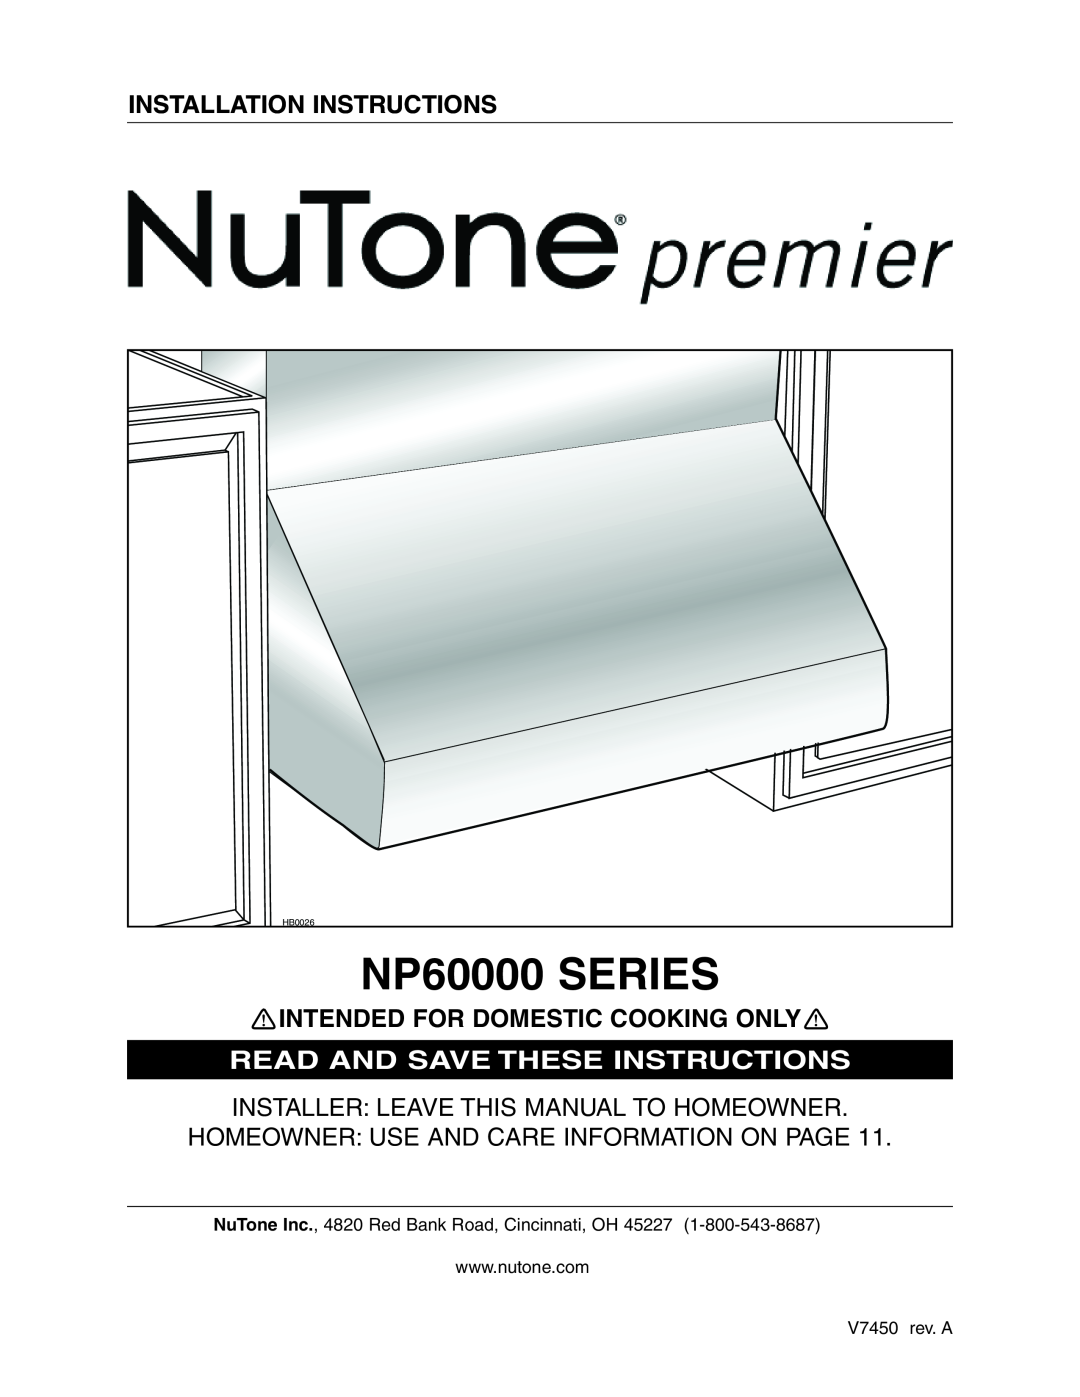 NuTone installation instructions NP60000 SERIES, Installation Instructions, Intended For Domestic Cooking Only, HB0026 